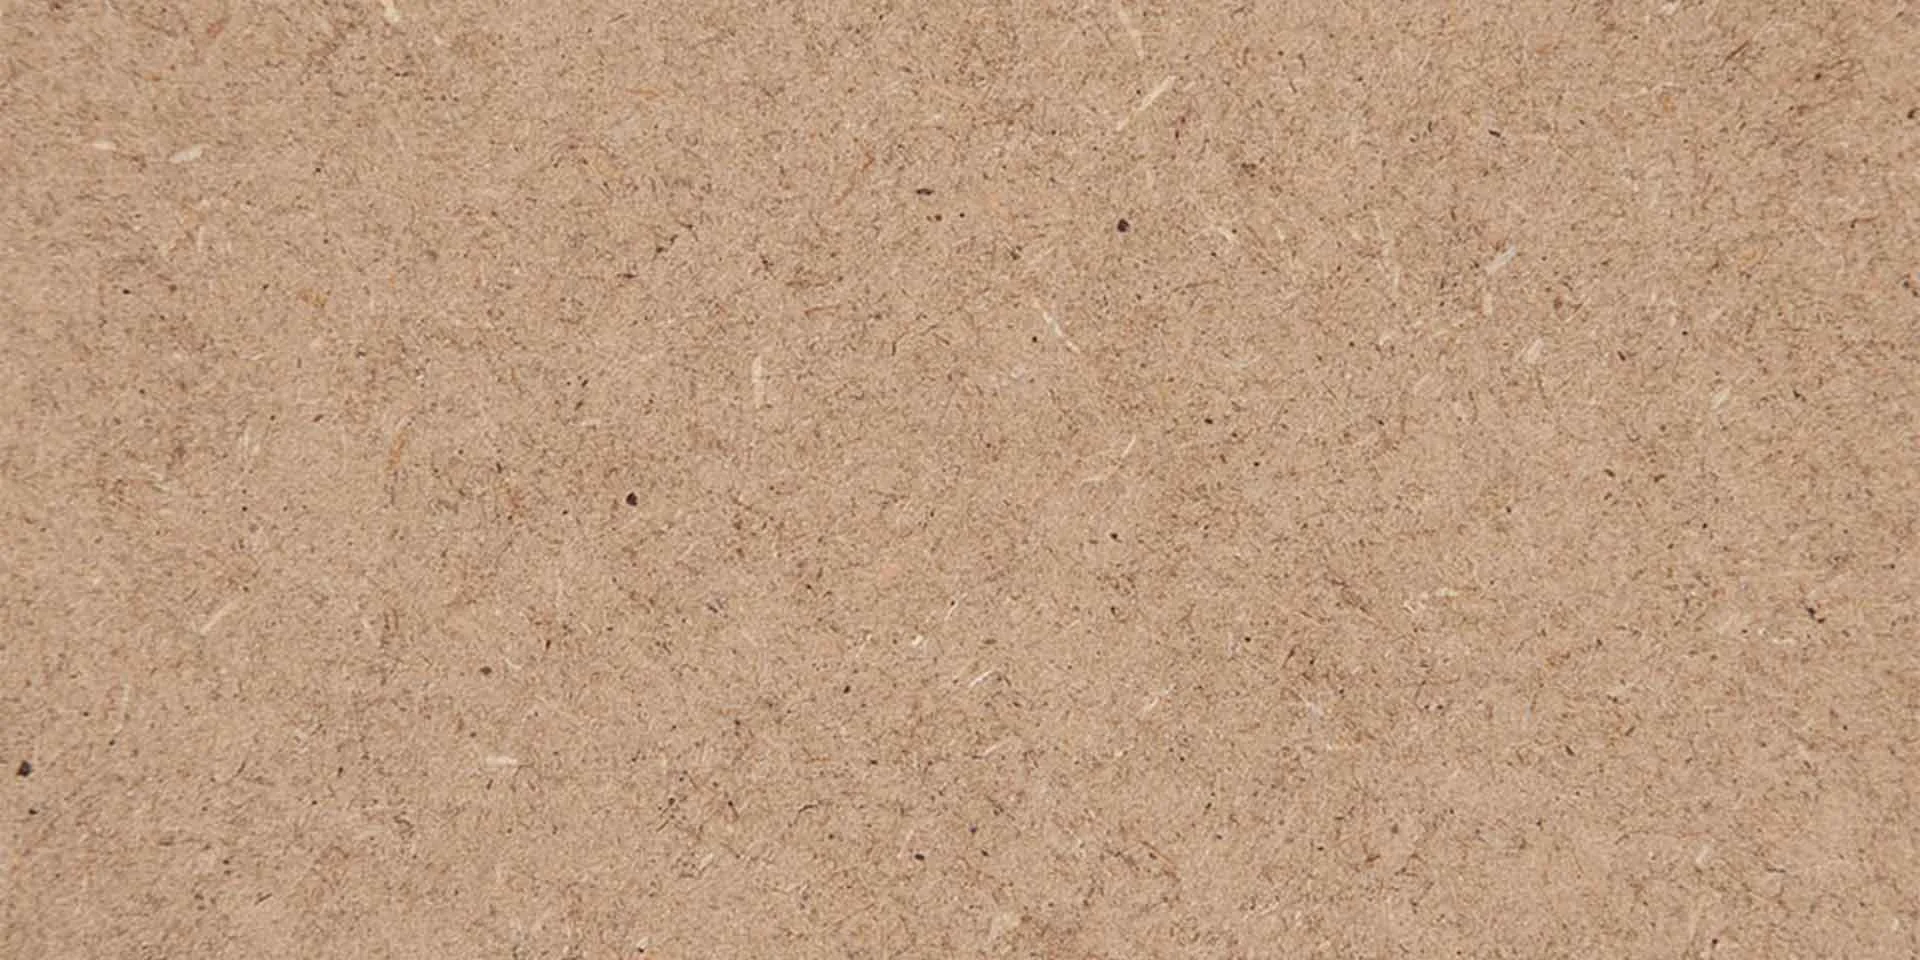 TSFC006 in MDF natural